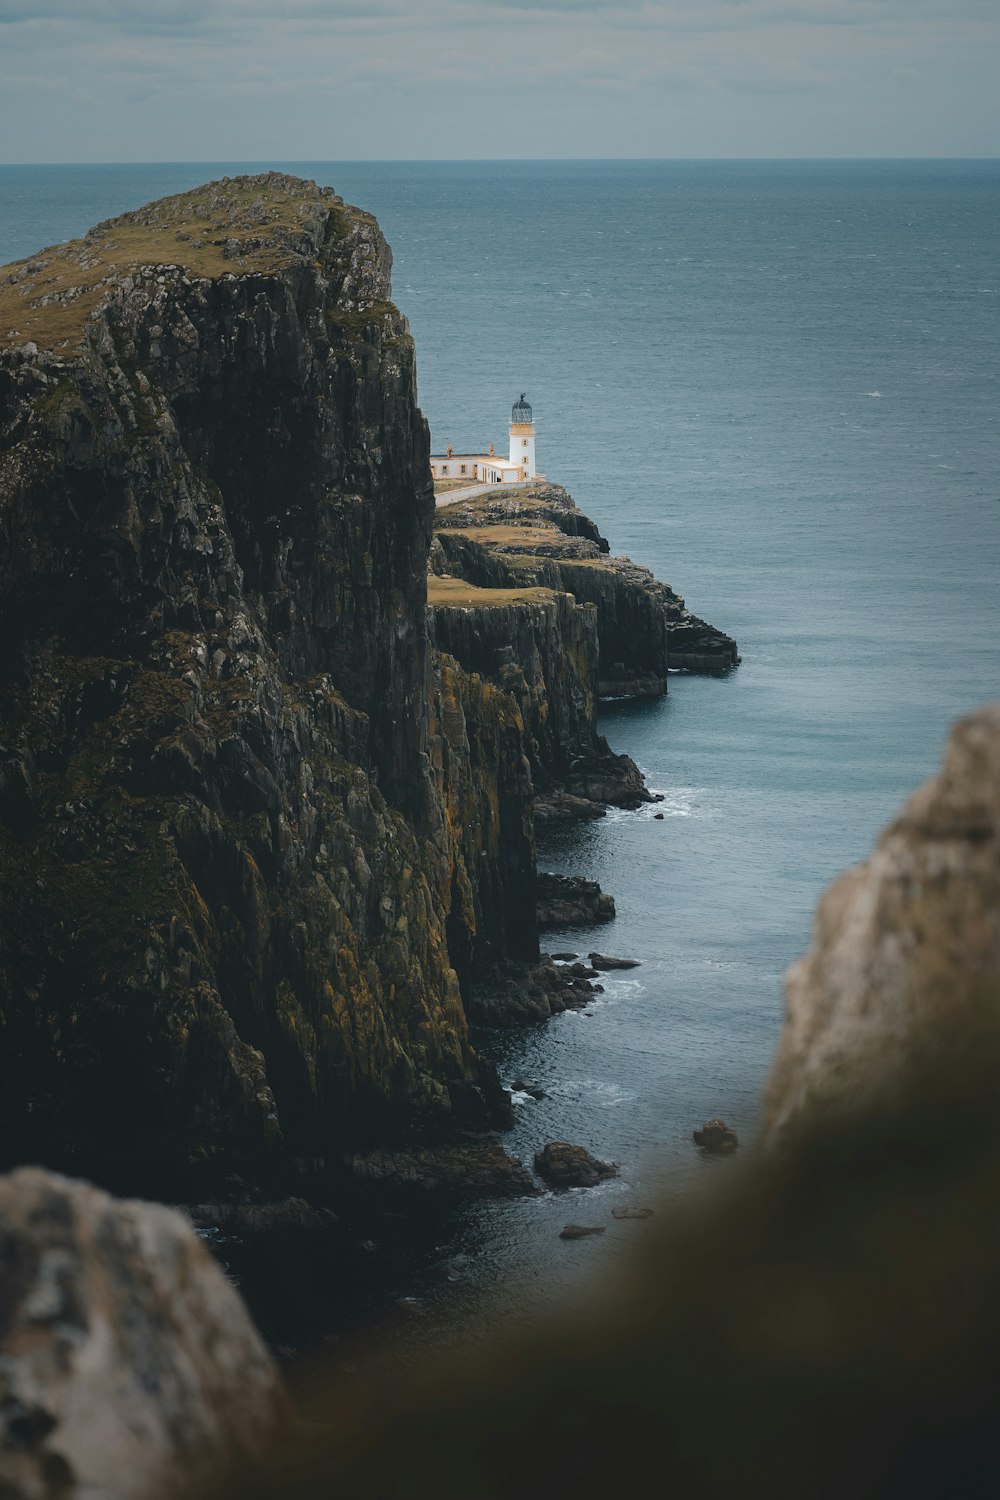 lighthouse on cliff